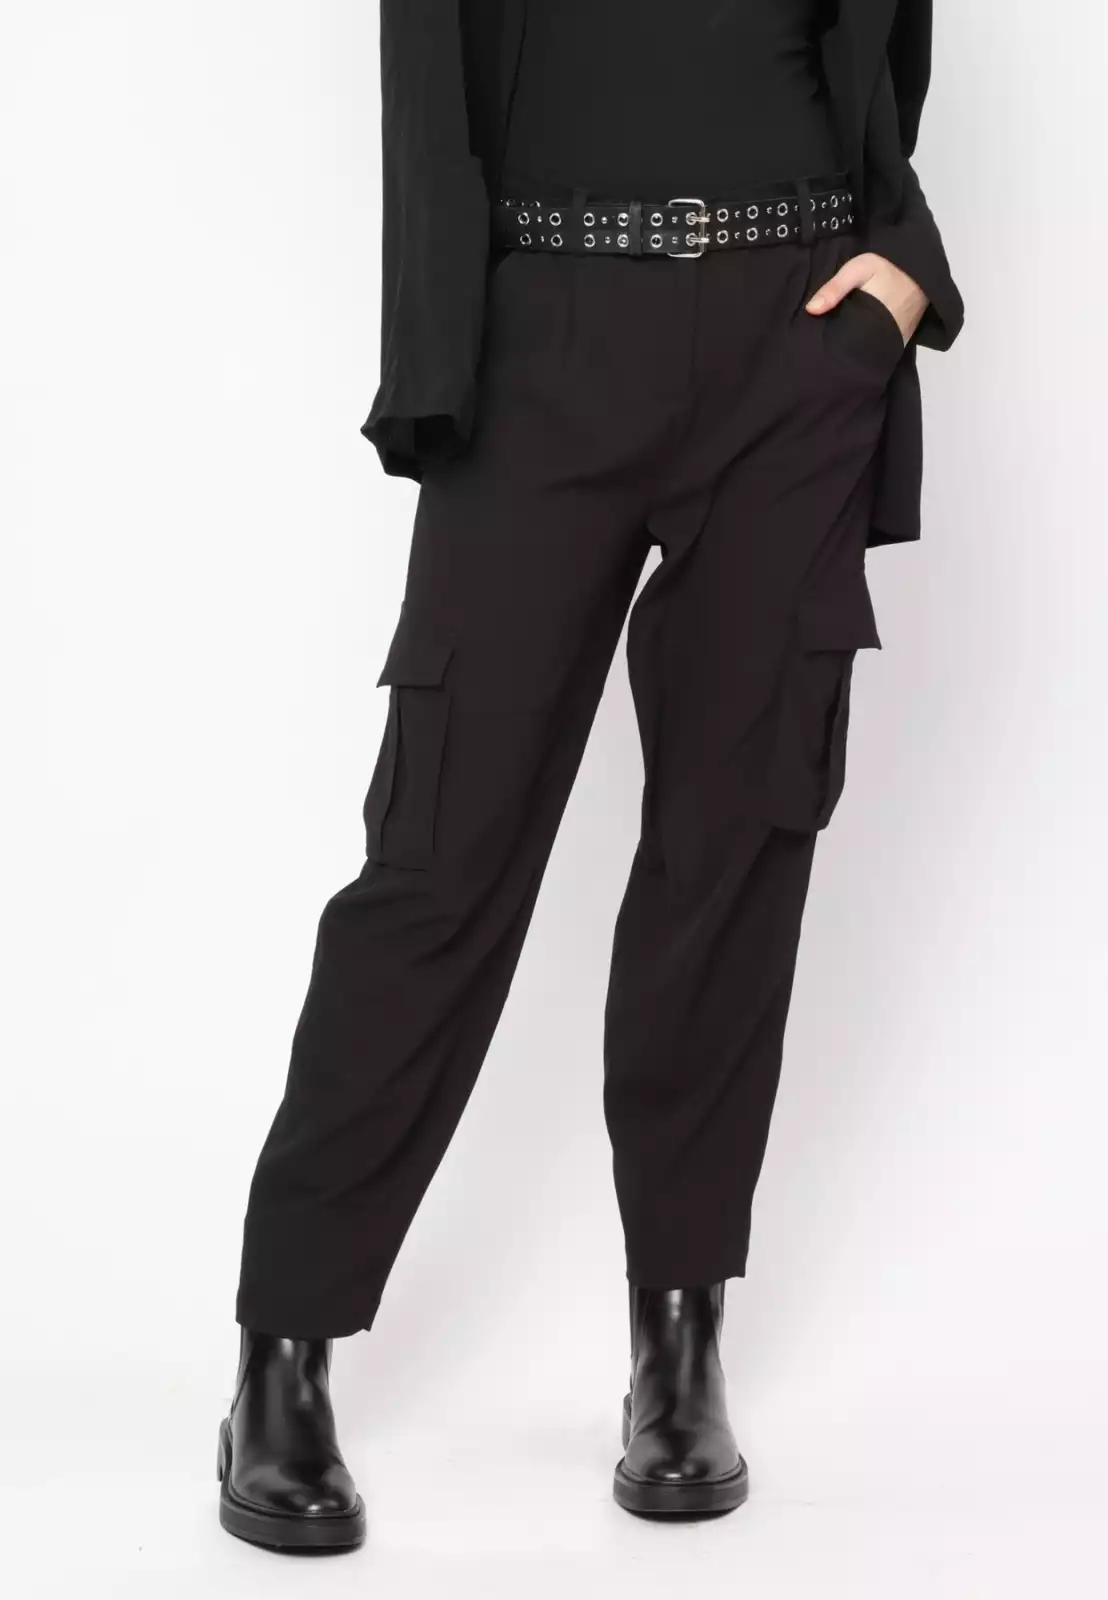 CLOTHING Women's Trousers